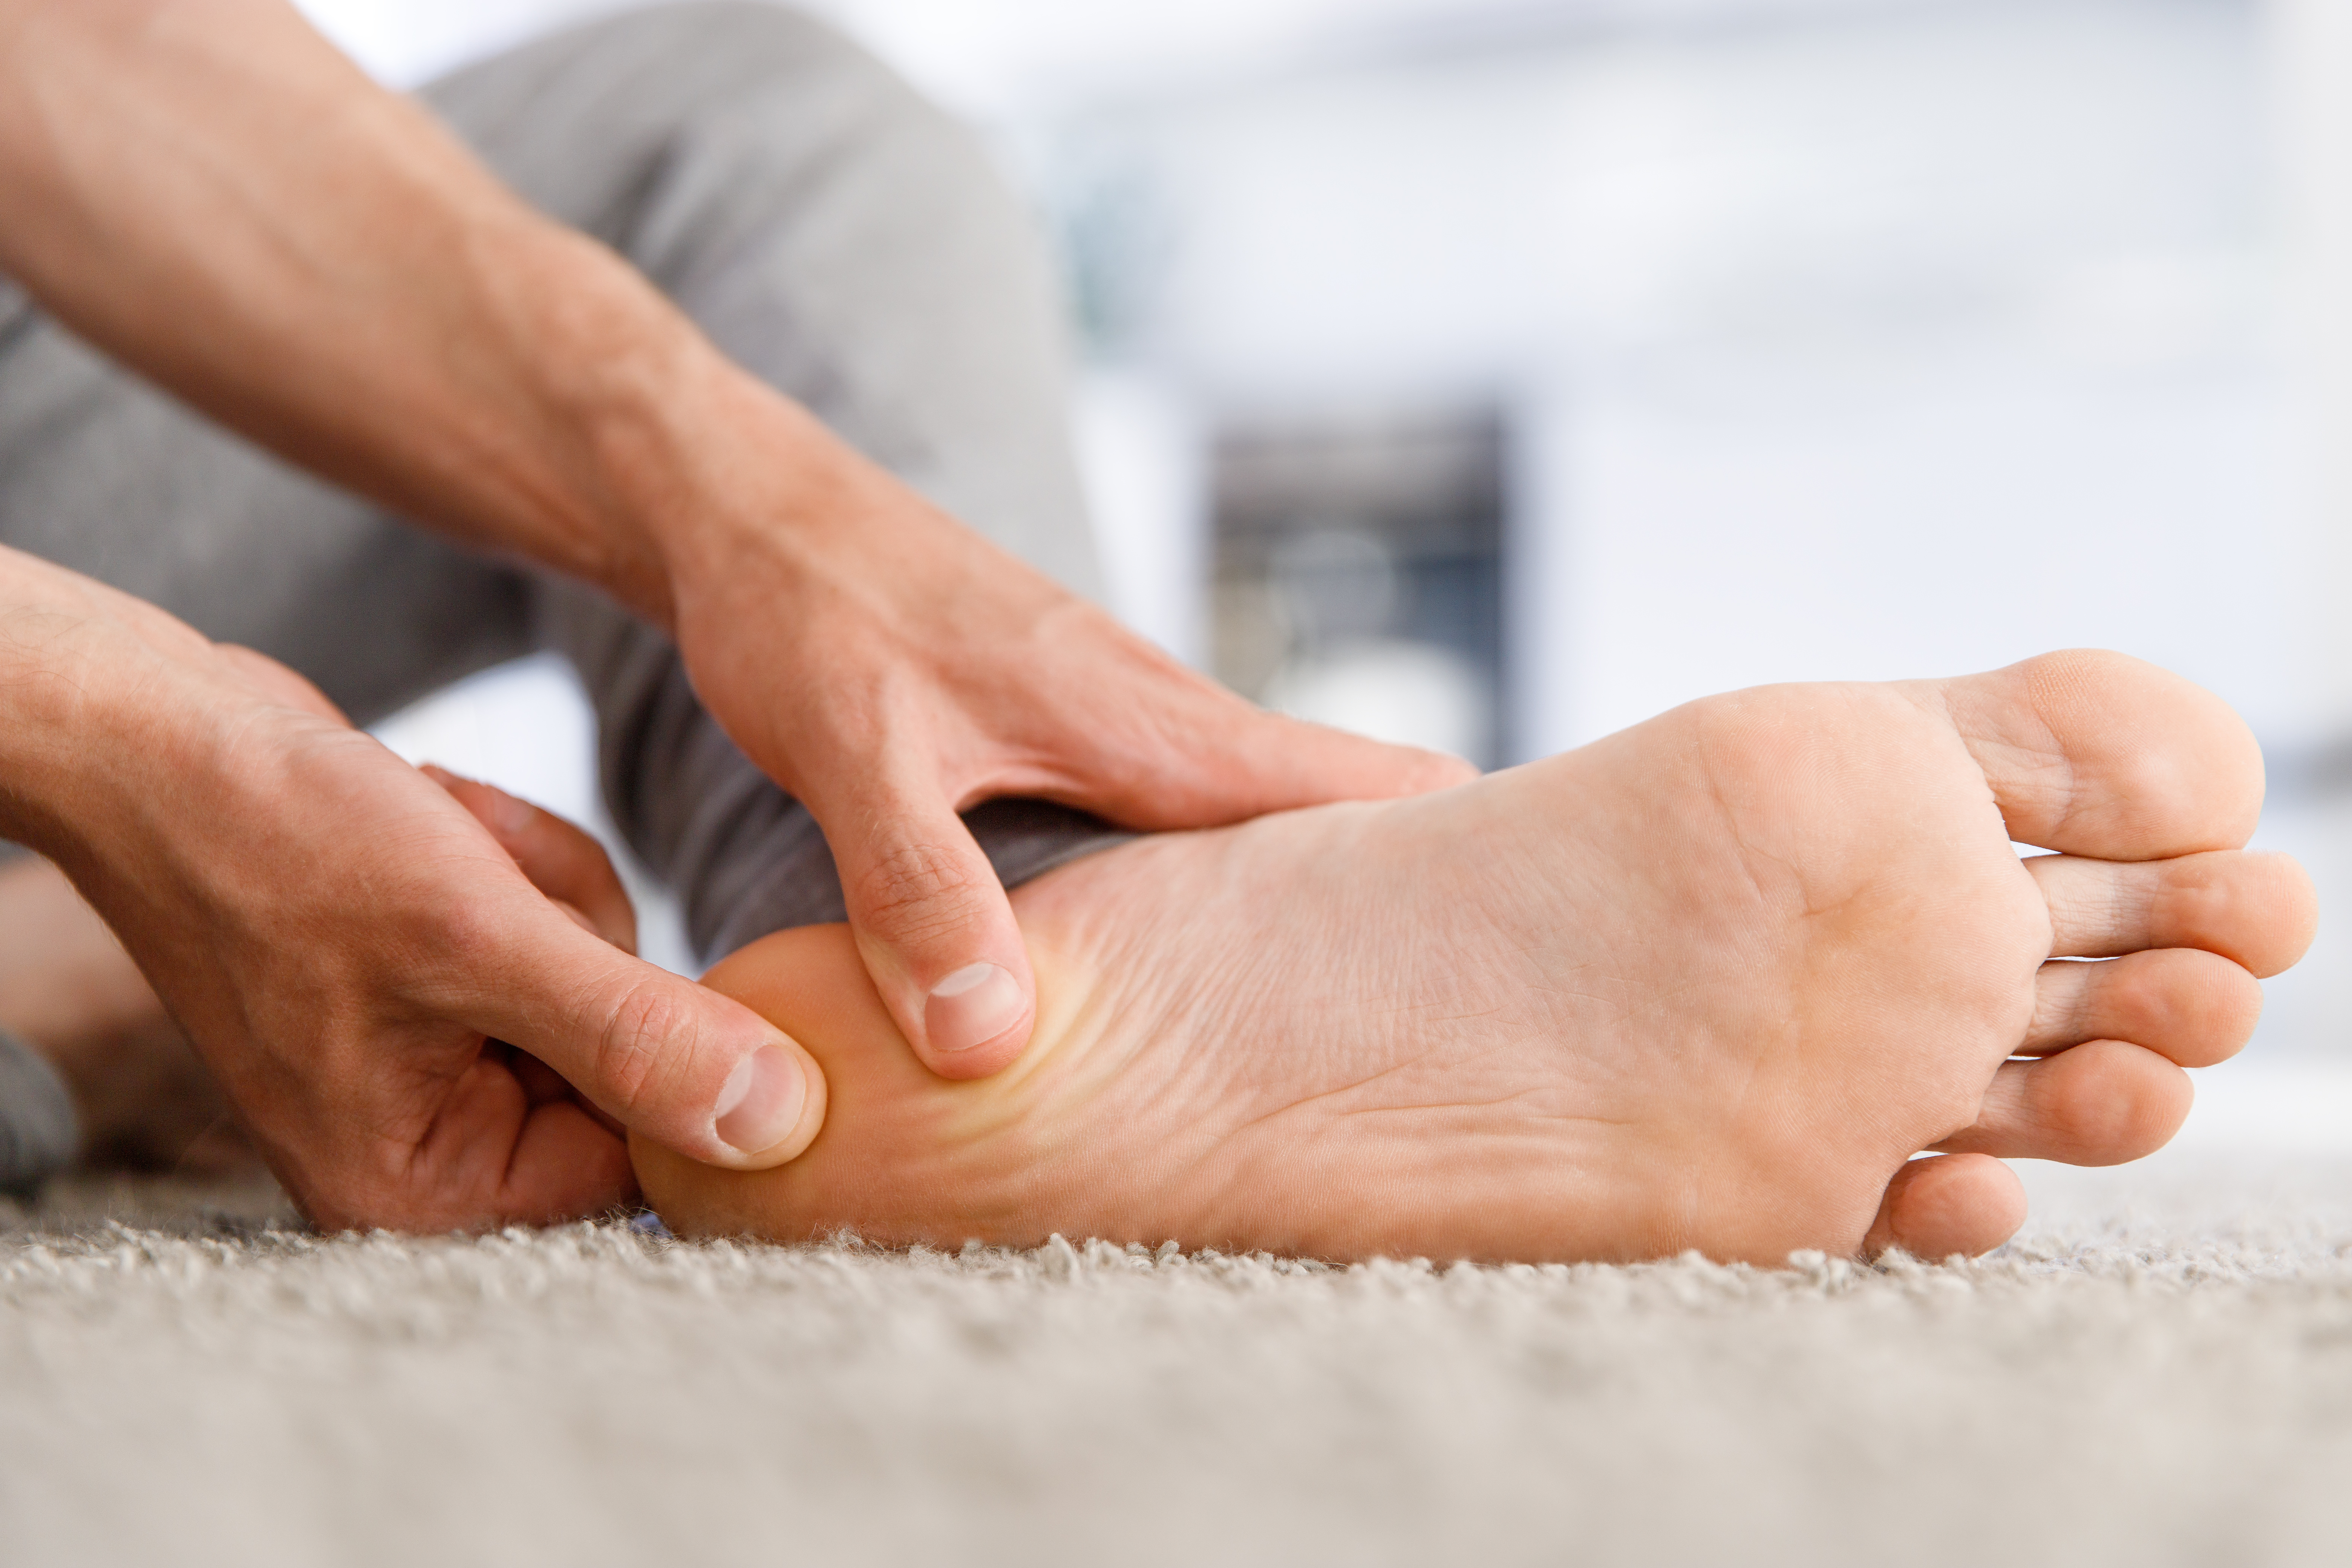 Plantar Fasciitis can be very painful but relief is possible